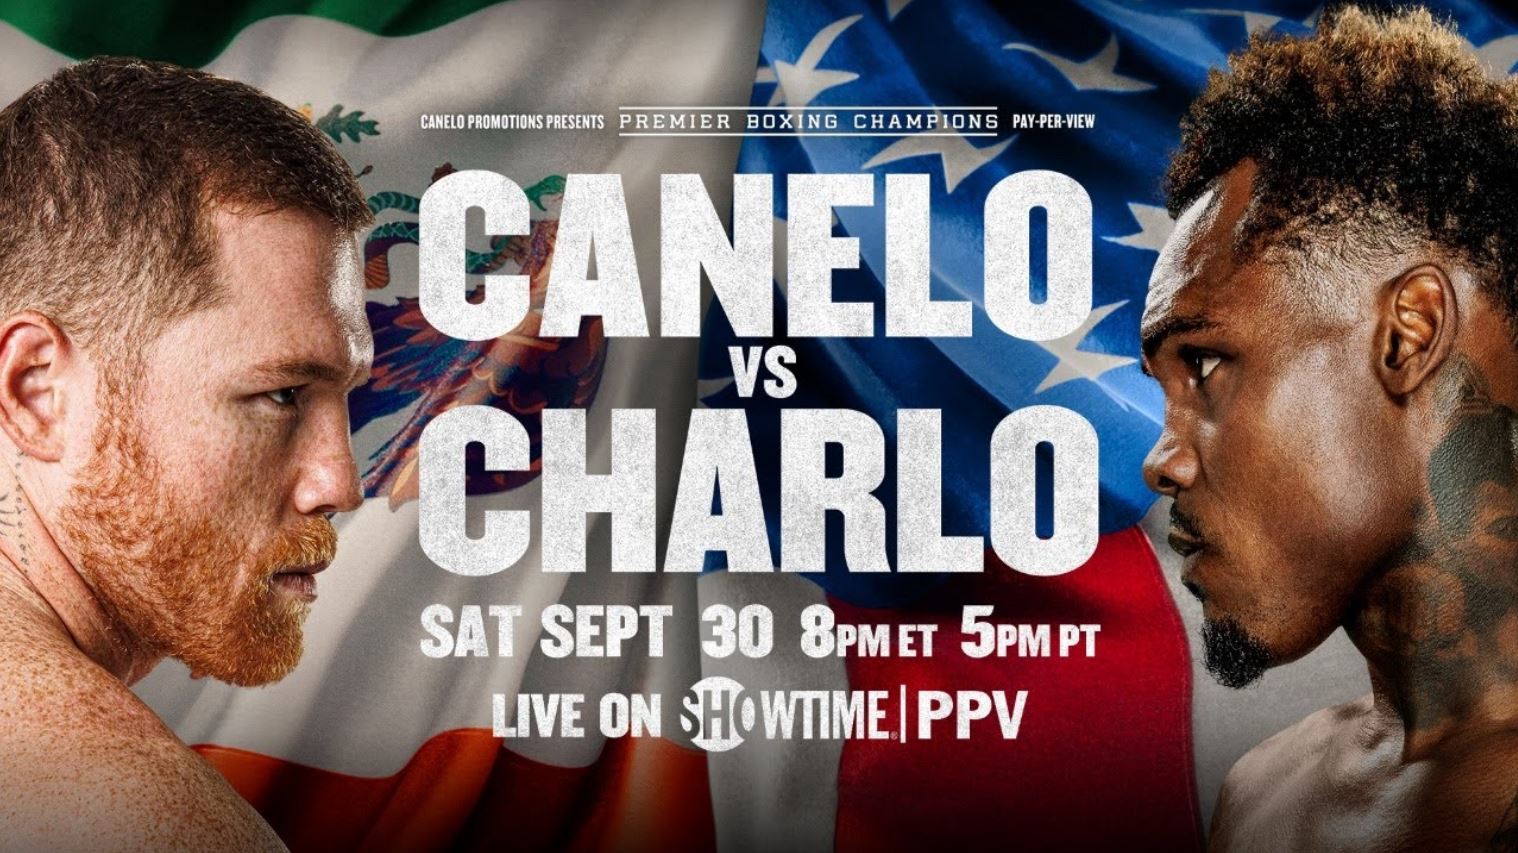 How to watch Canelo vs